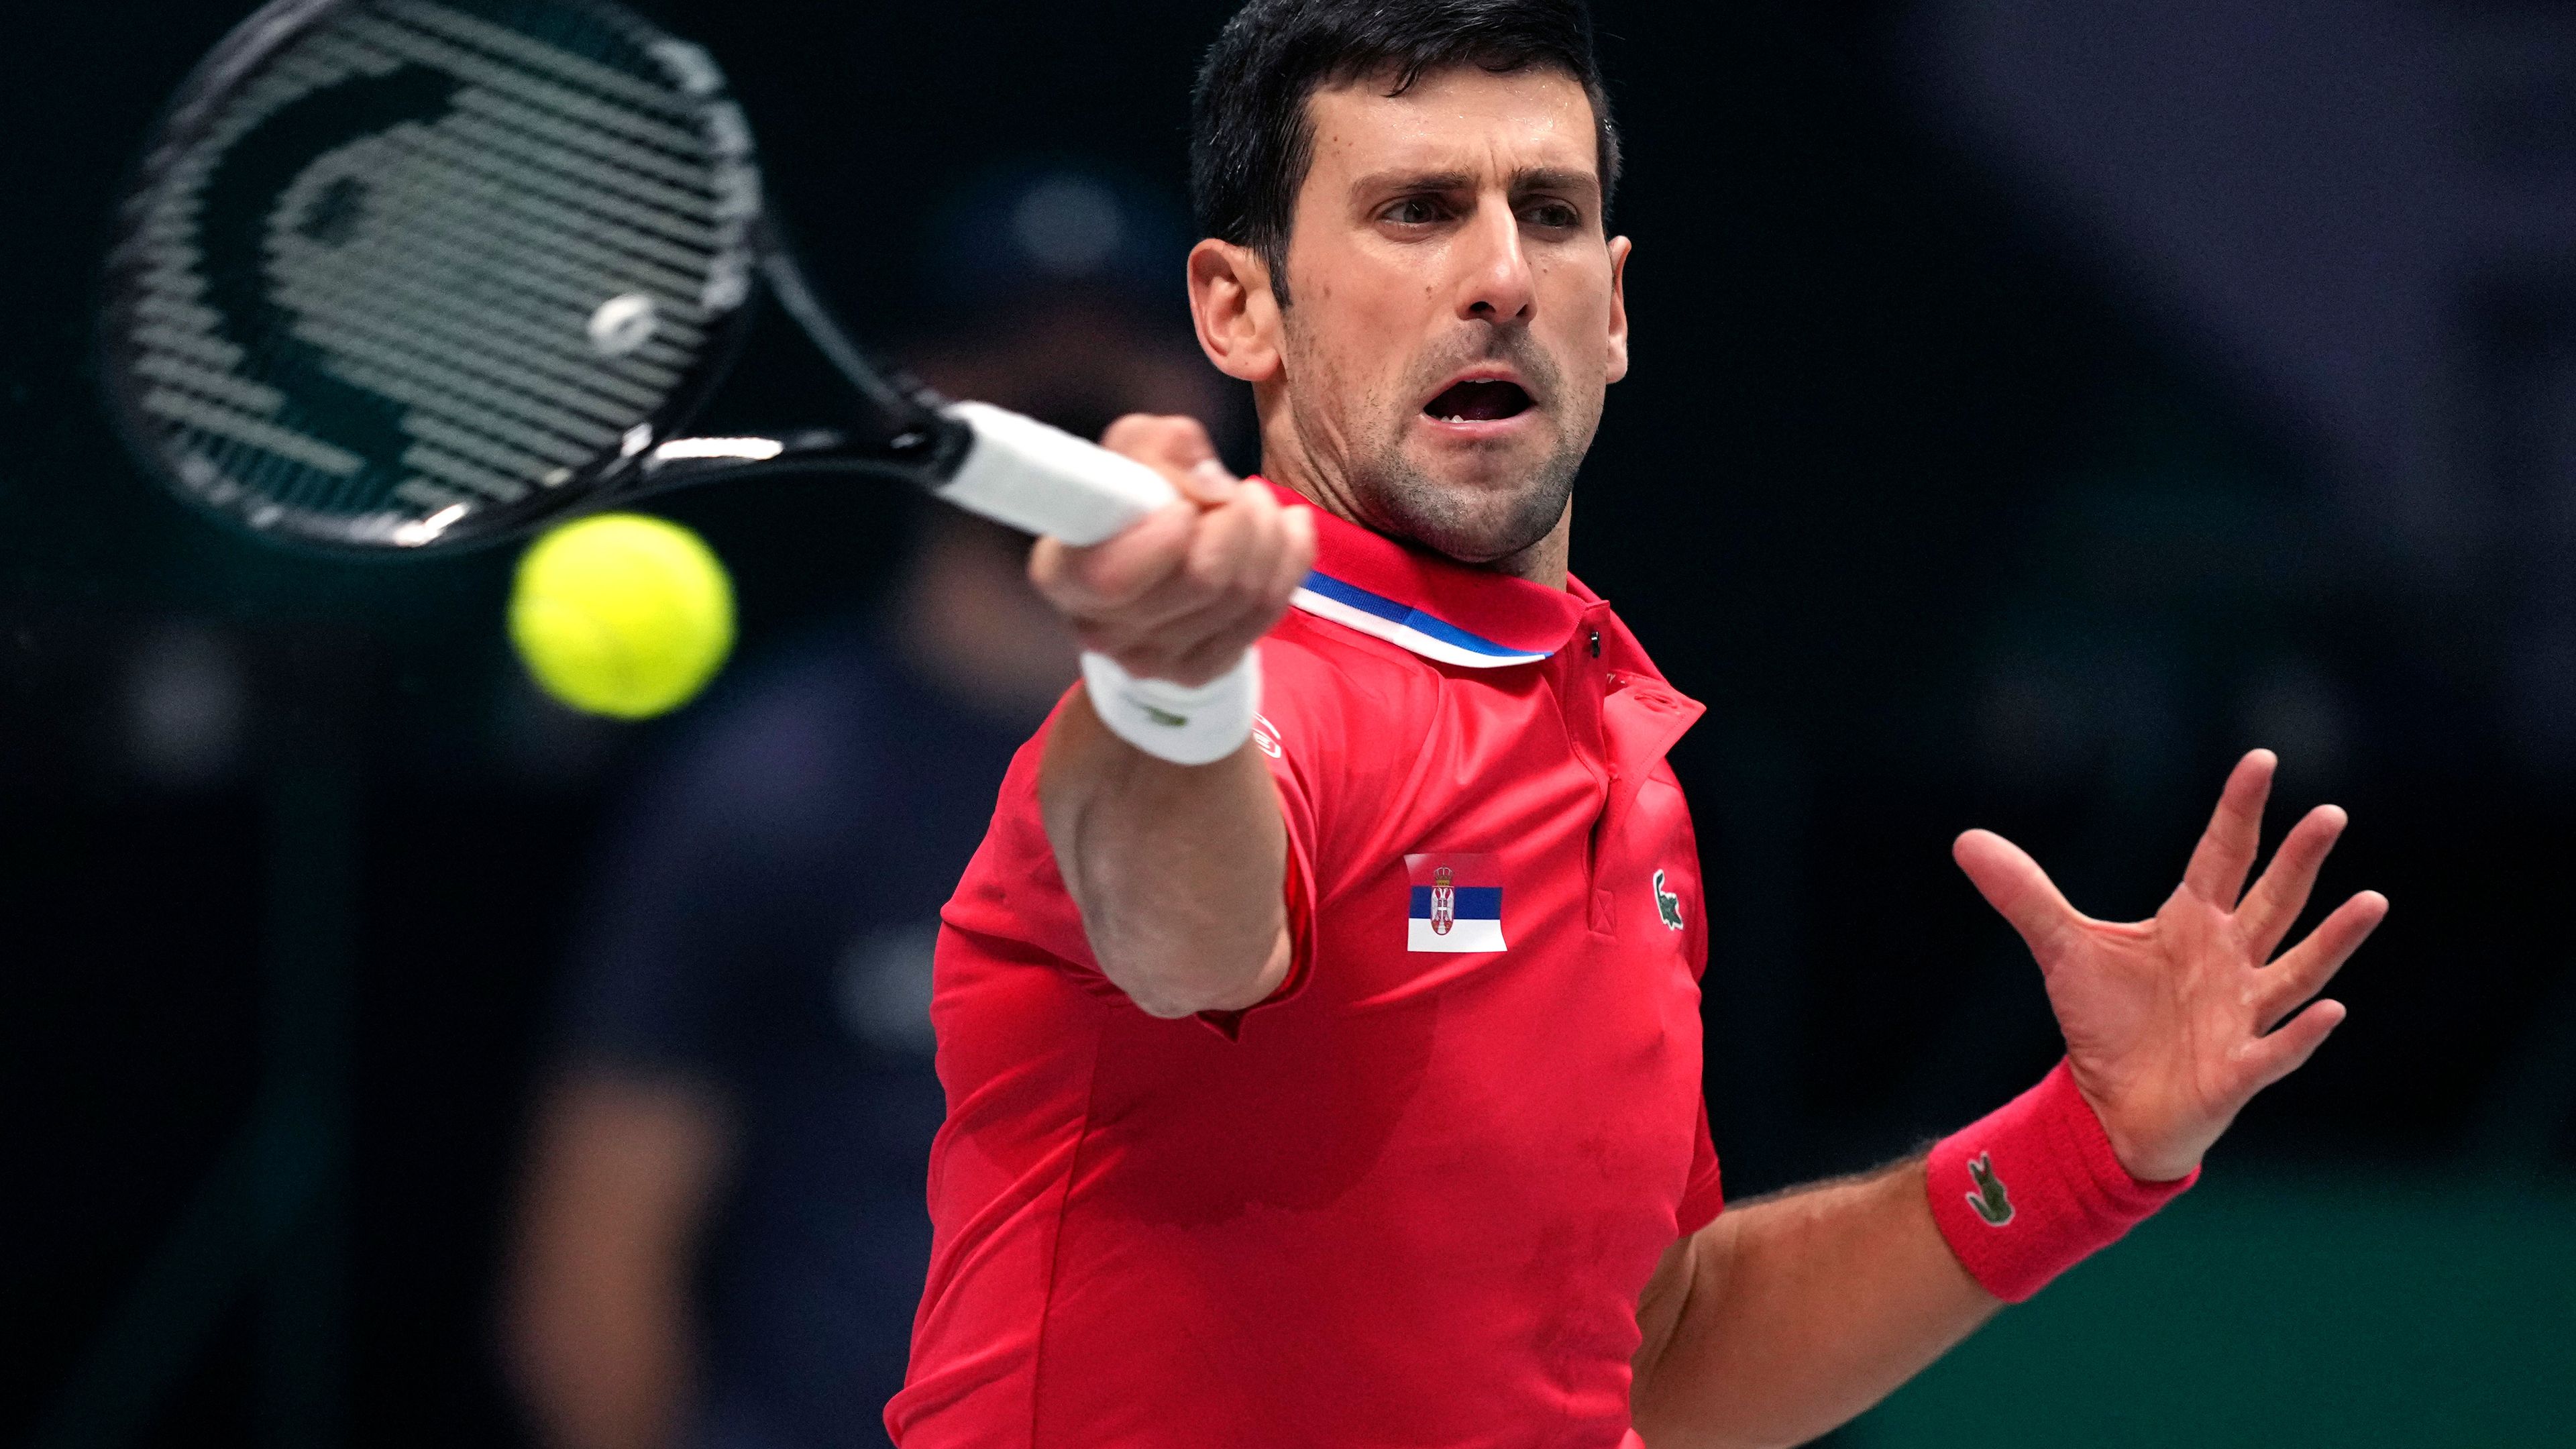 Djokovic not afforded 'special opportunity'